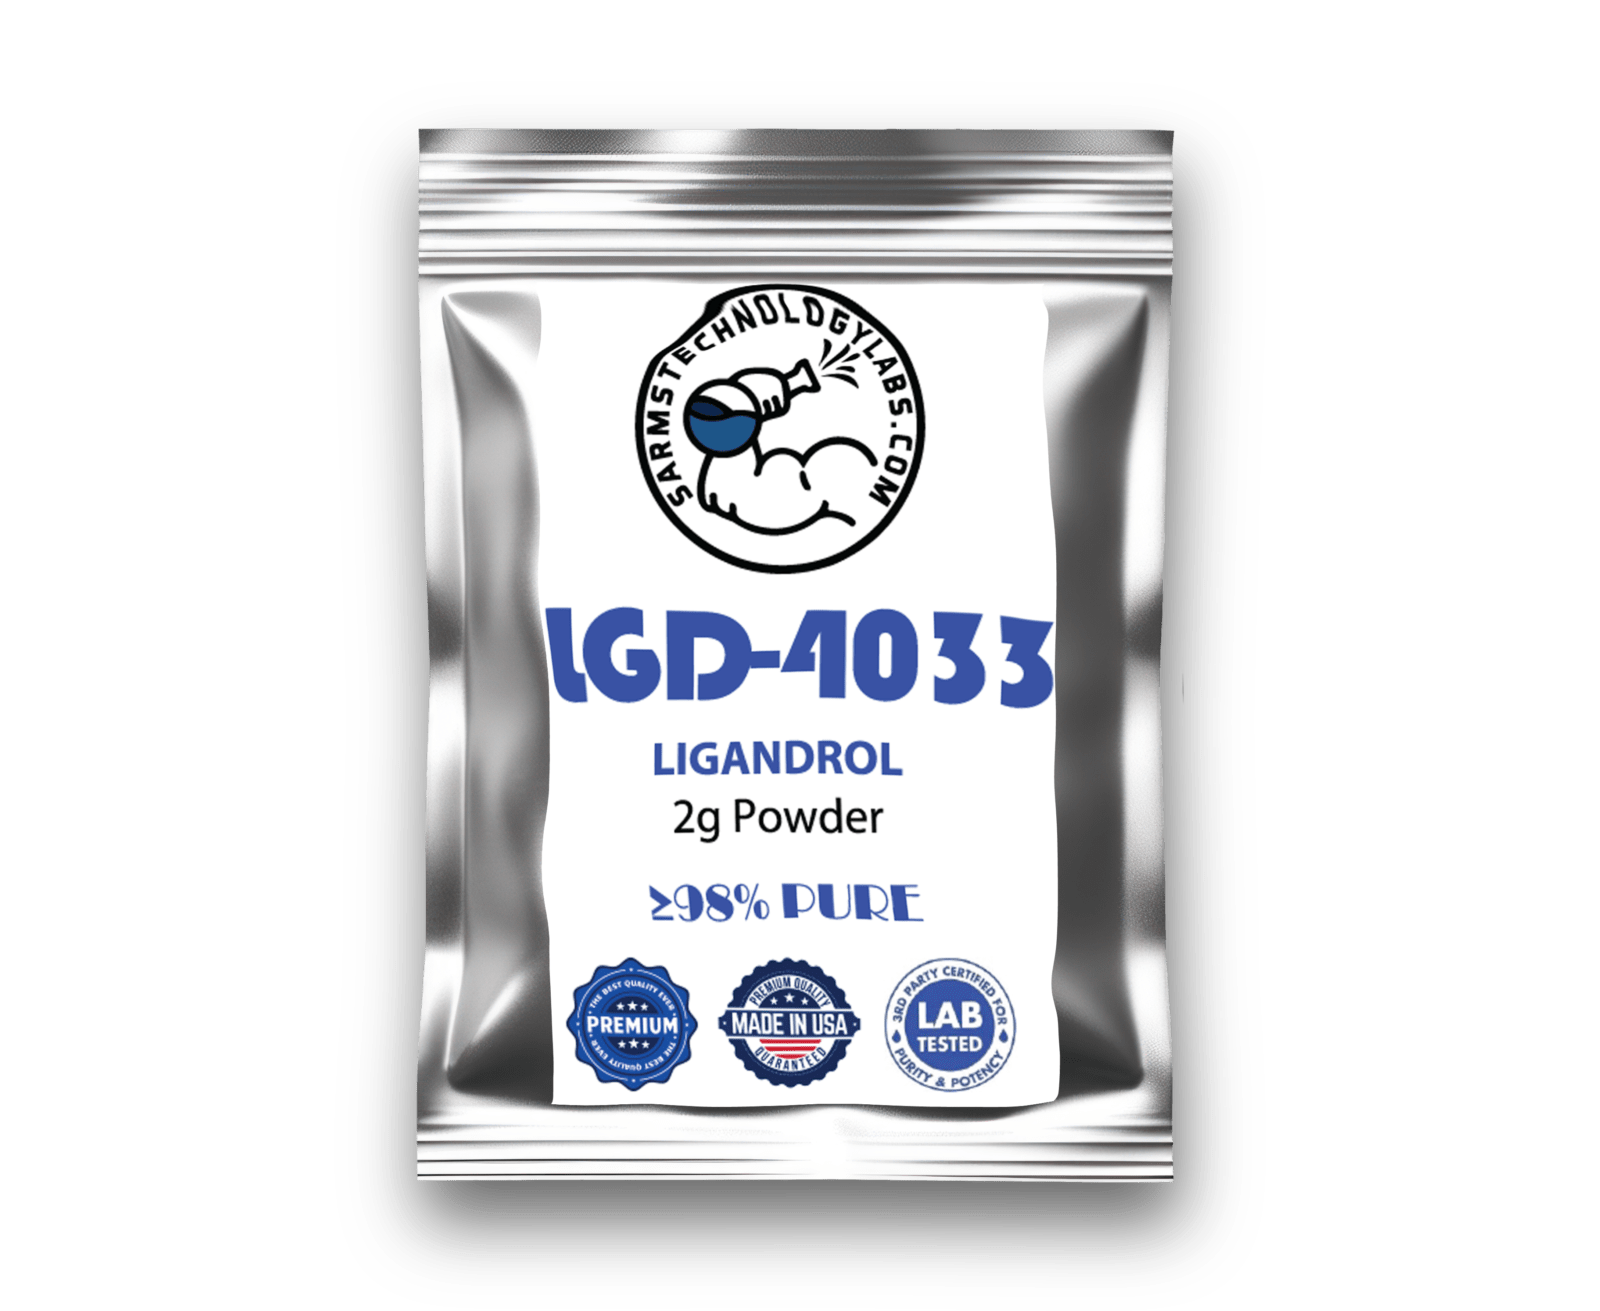 Buy High-Quality LGD-4033 Powder for Research - SARMS TECH